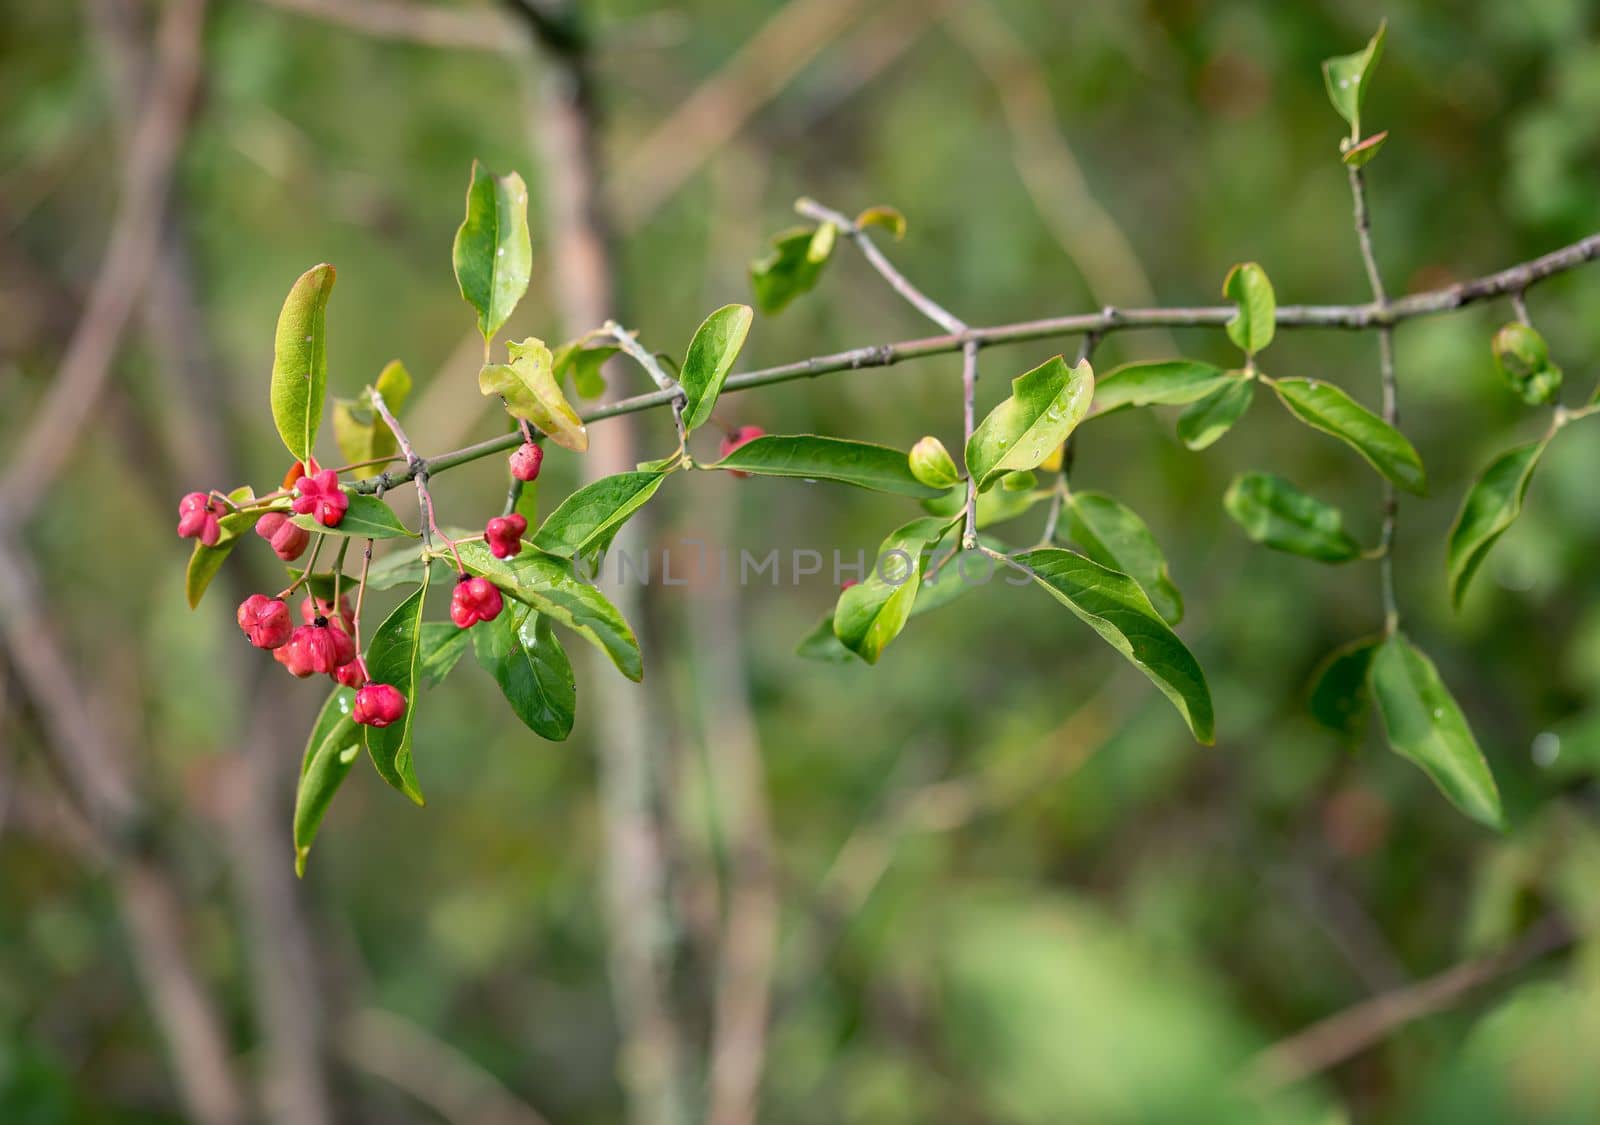 Red Euonymus europaeus, also called spindle, European spindle, or common spindle,  on a twig, in the Marche region of Italy